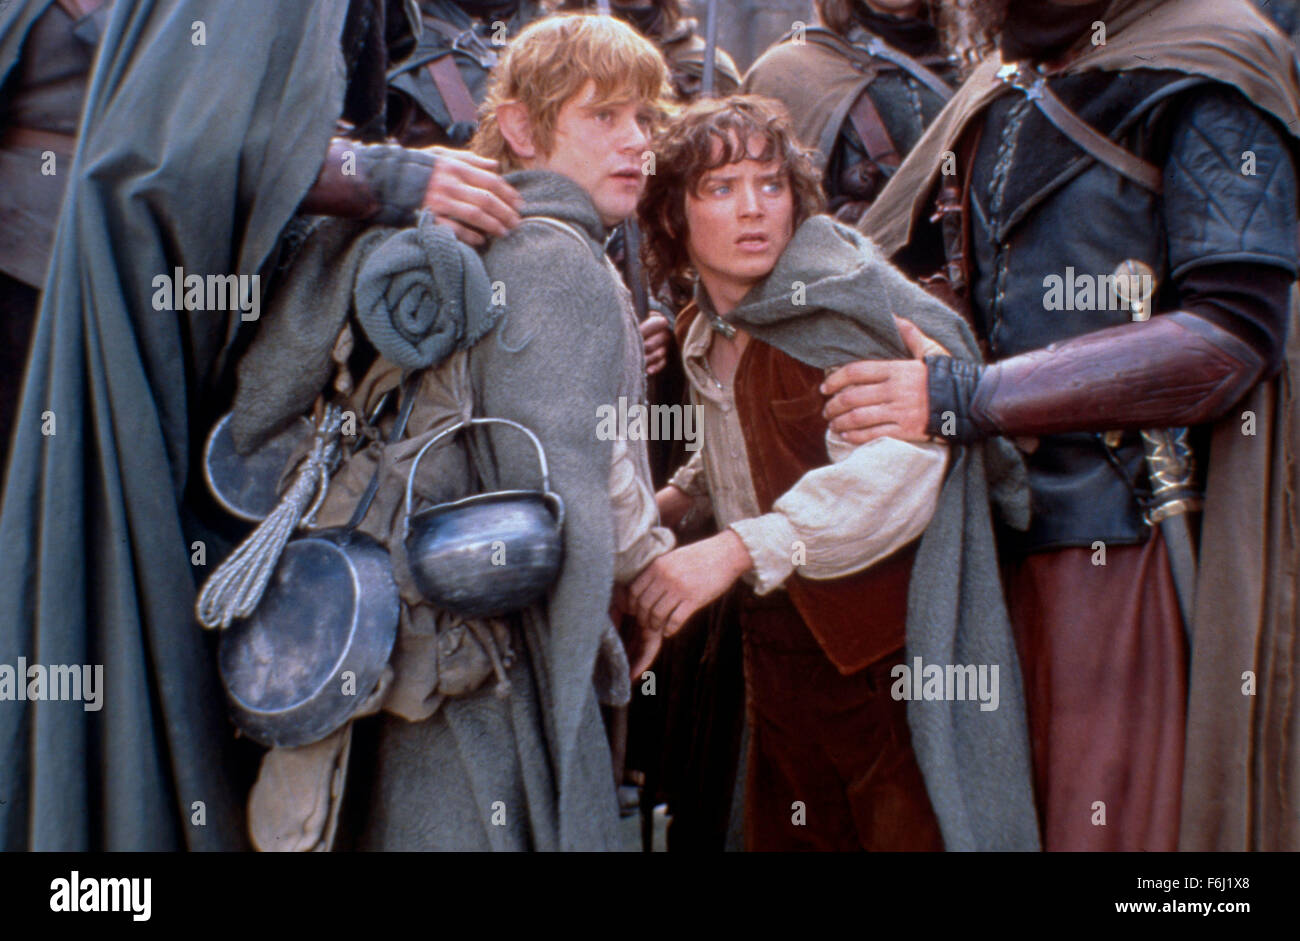 Nov 04, 2002; Queenstown, New Zealand; ELIJAH WOOD and SEAN ASTIN star as Frodo Baggins and Samwise 'Sam' Gamgee in the fantasy adventure 'The Lord of the Rings; The Two Towers' directed by Peter Jackson. Stock Photo